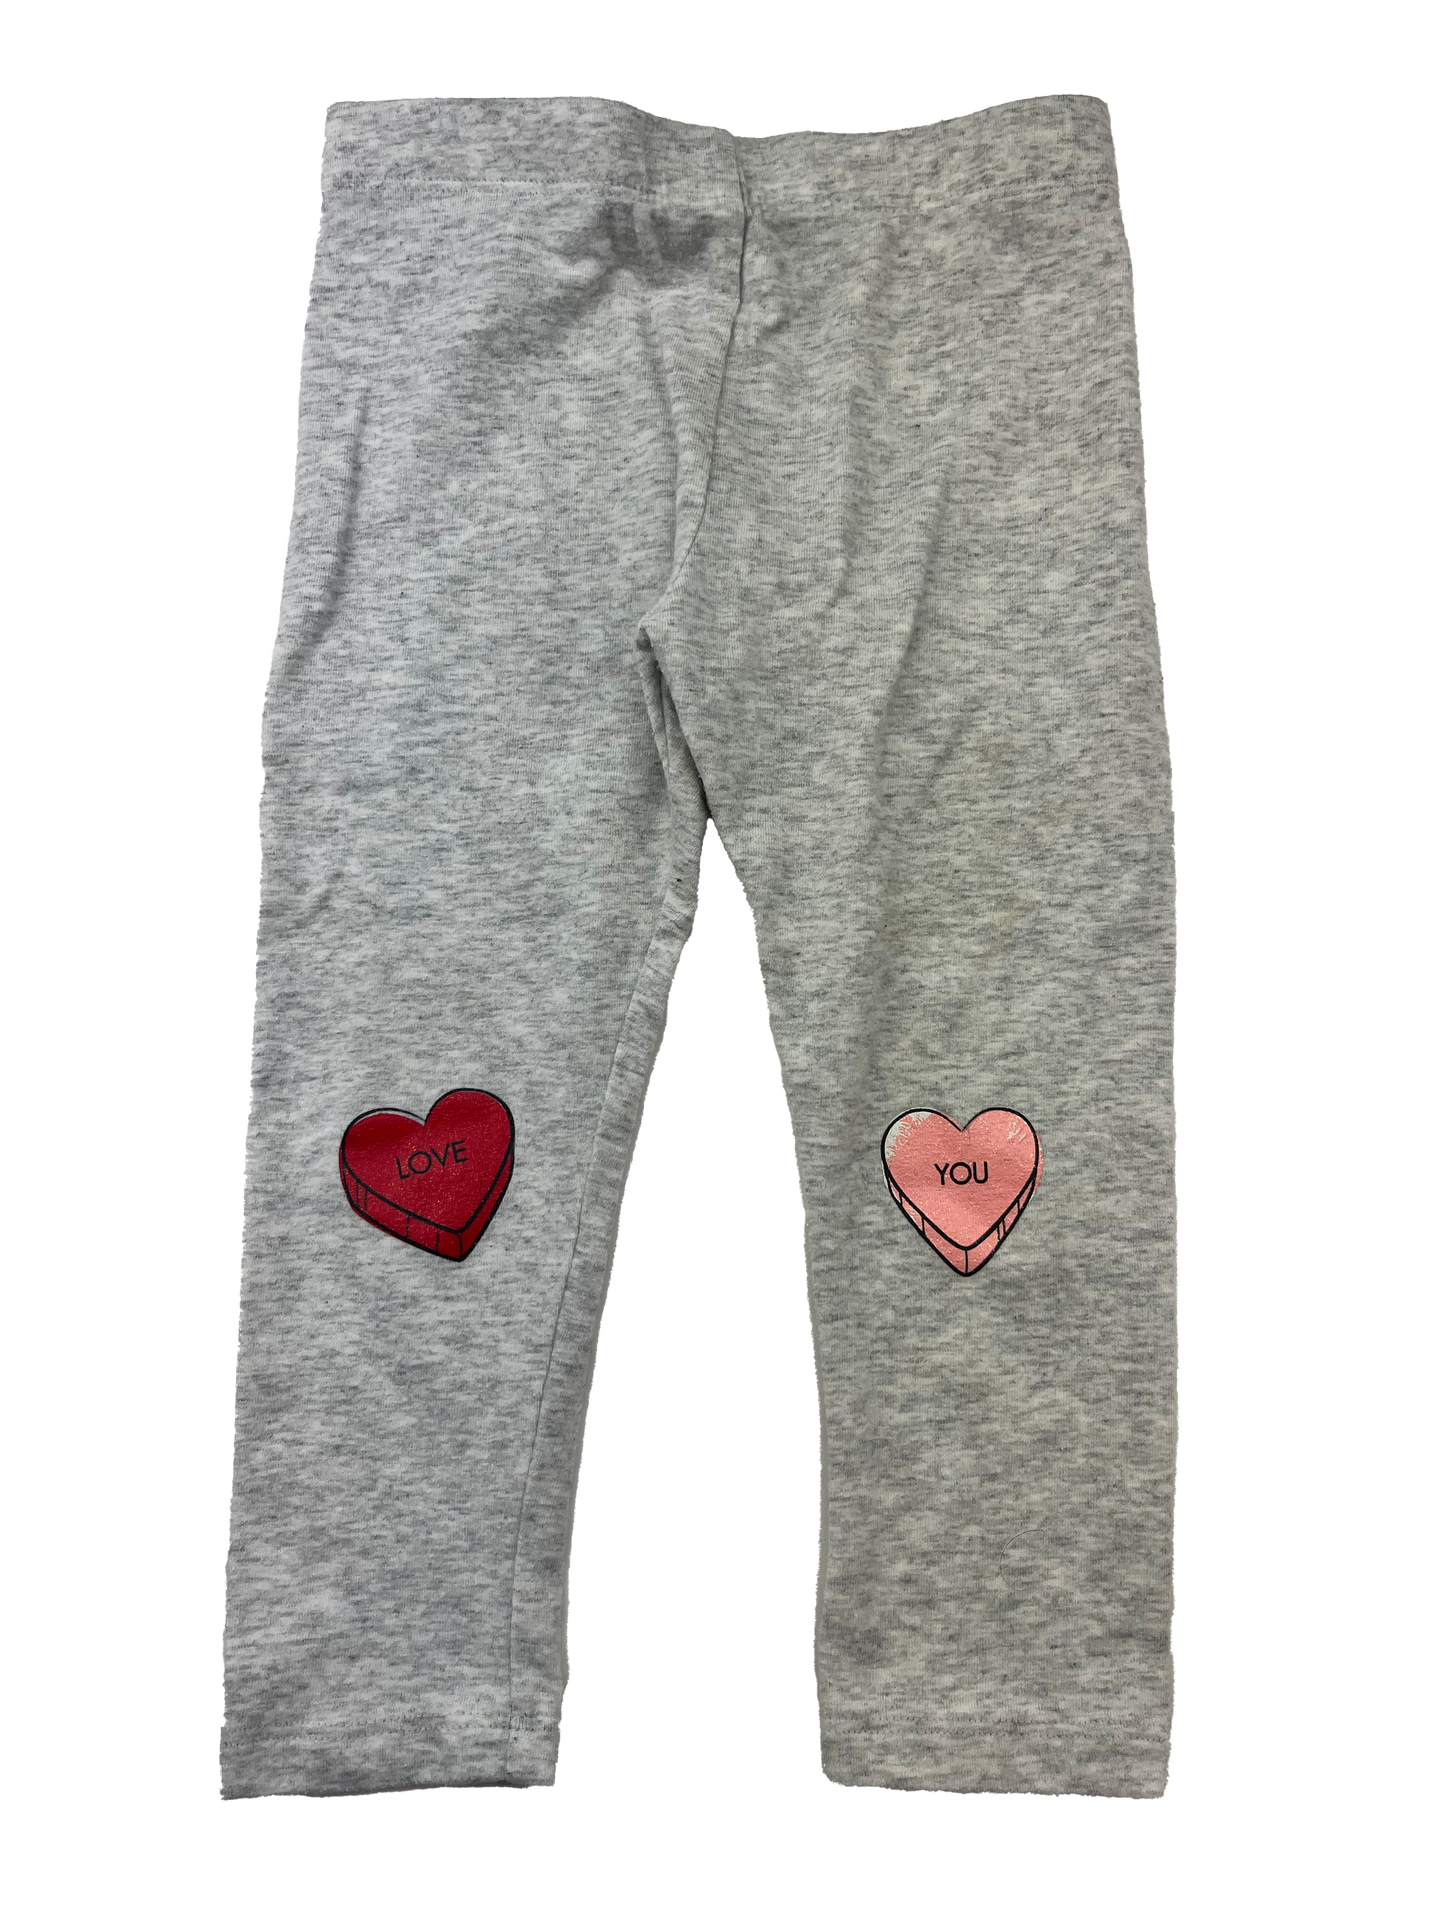 George Grey Leggings with Hearts on Knees 18-24M